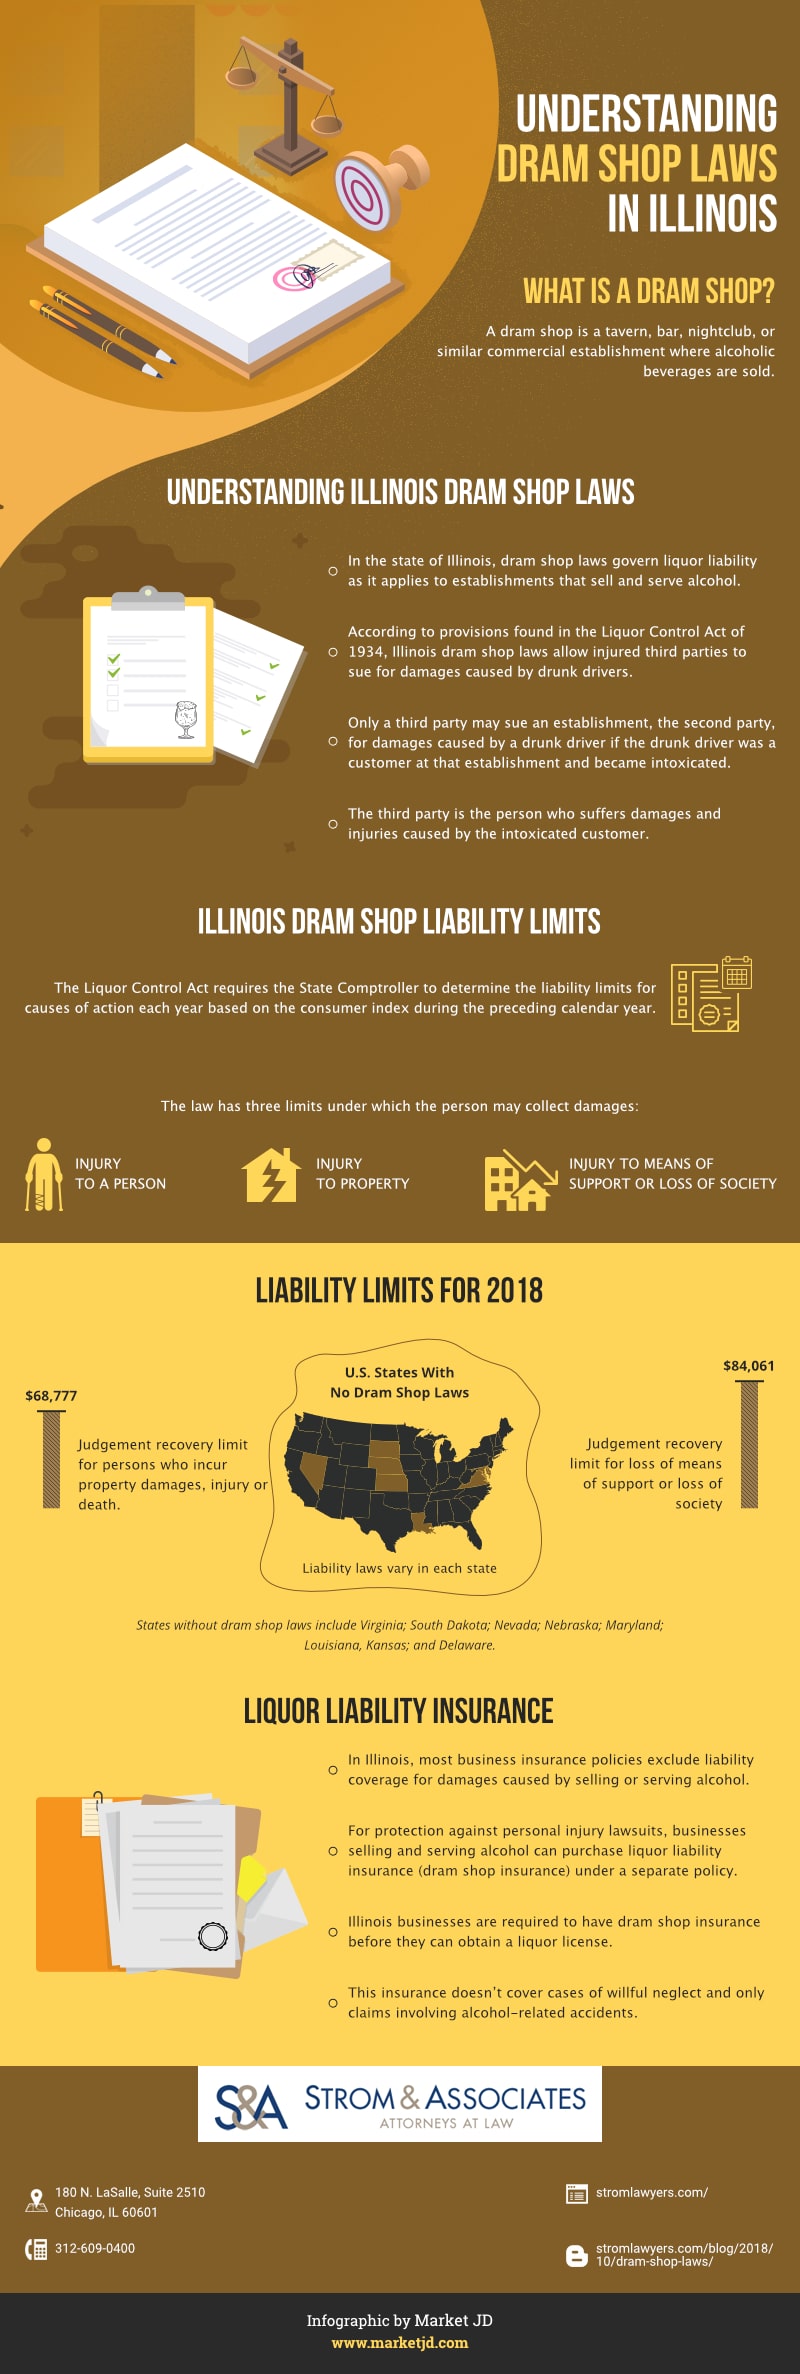 DRAM SHOP LAWS IN ILLINOIS_19122018